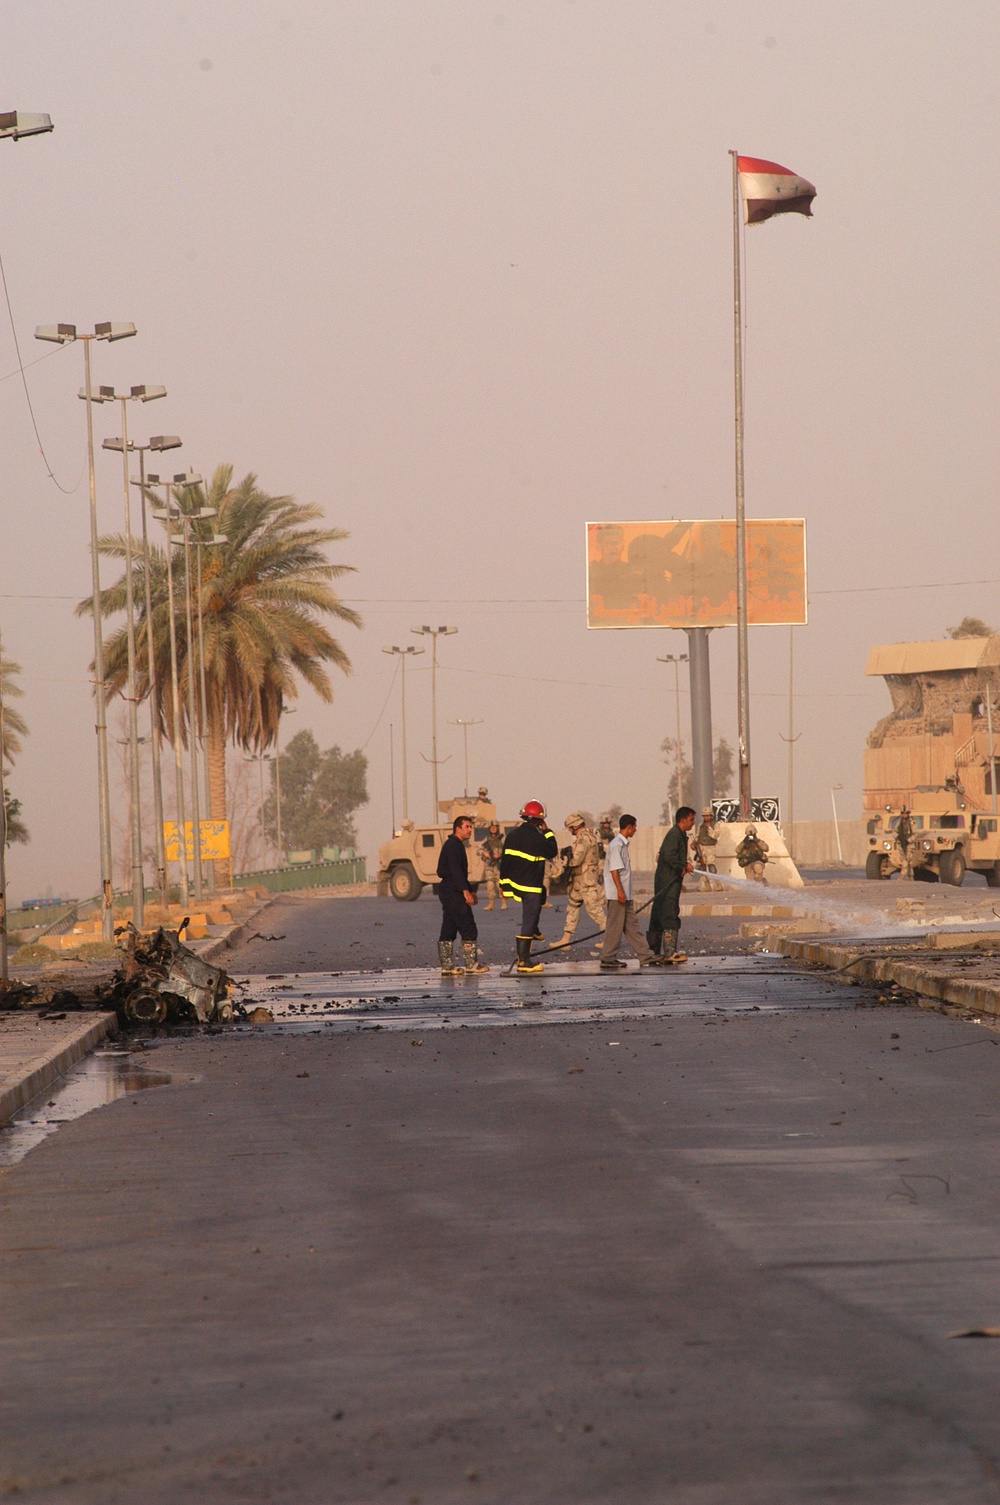 Iraqi firemen check the remnants of a detonated VBIED